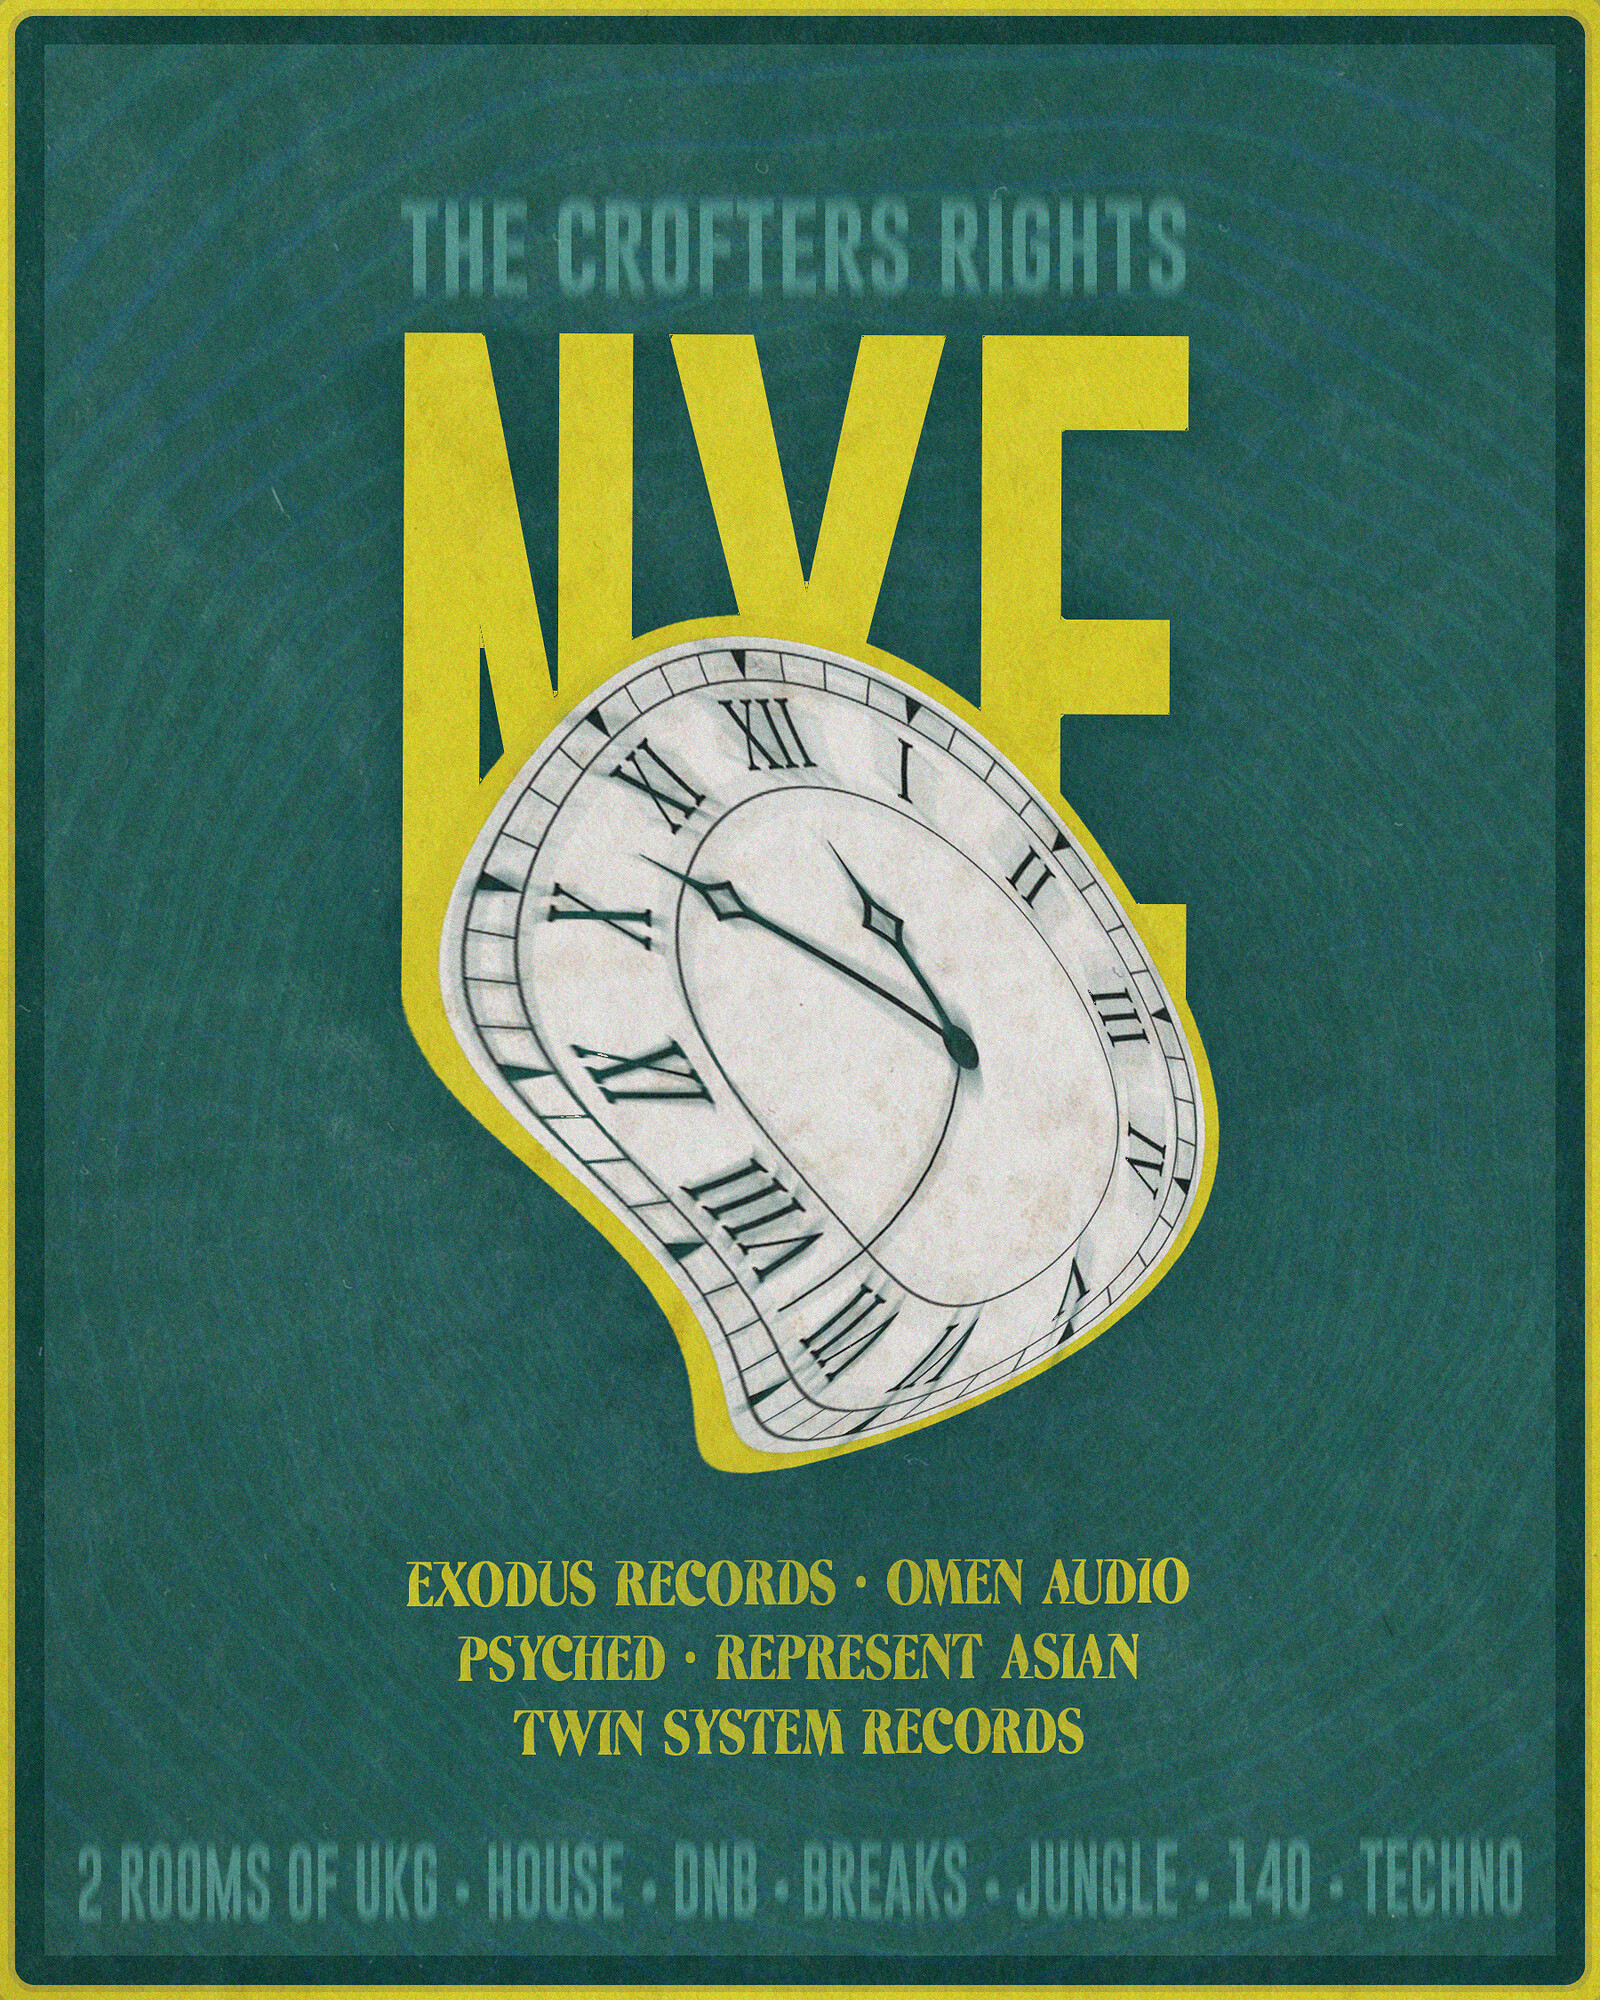 Crofters NYE 2022 - TICKETS ON THE DOOR at Crofters Rights